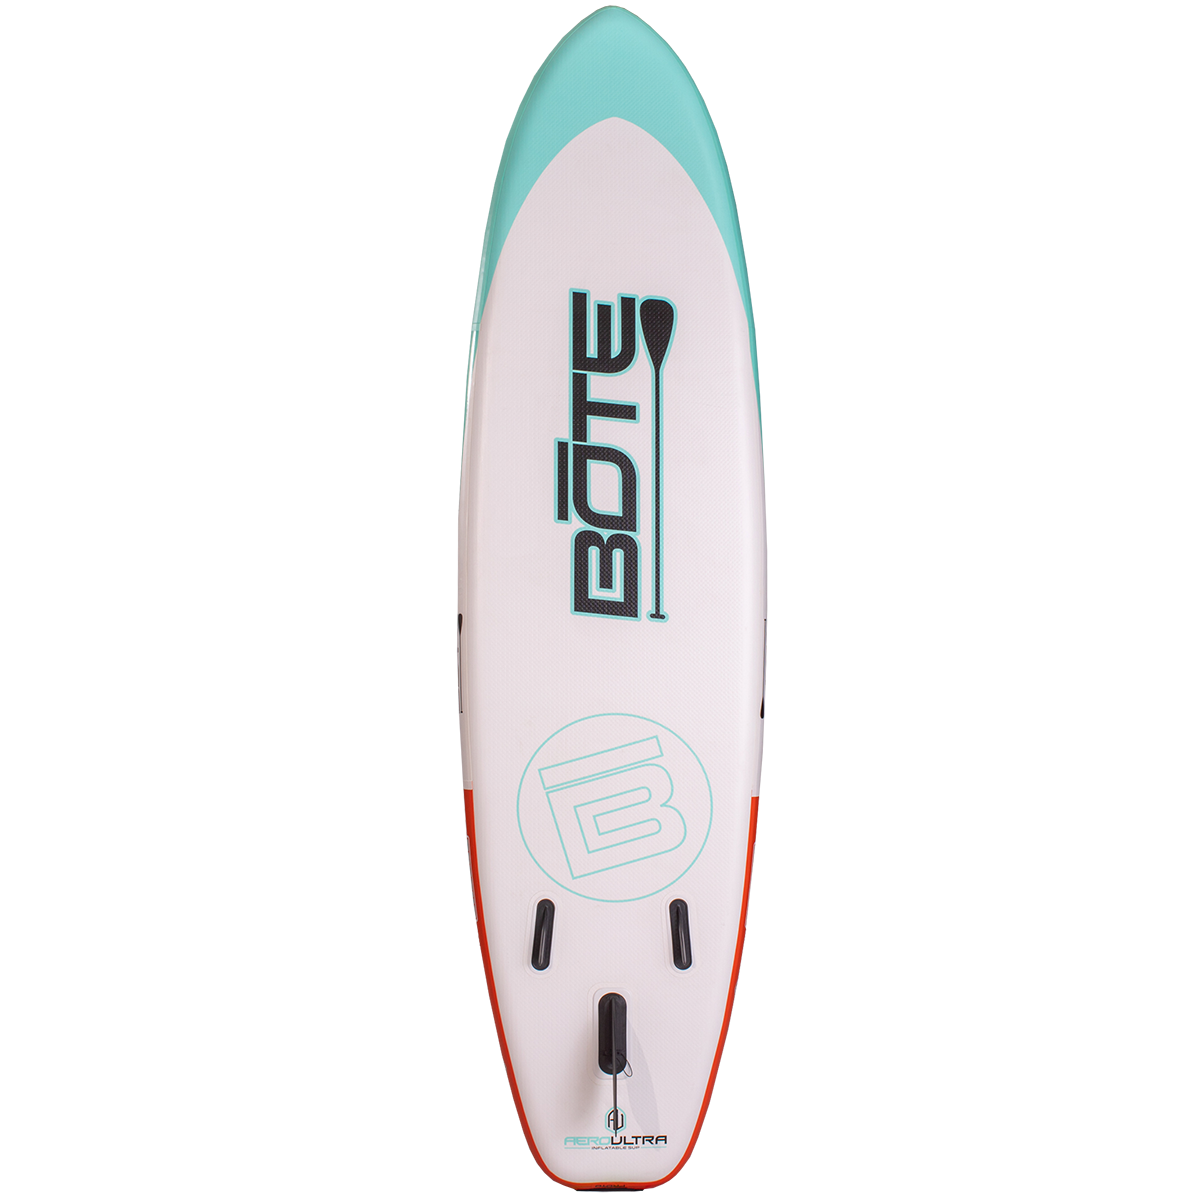 Breeze Aero Classic 10'8 Inflatable Paddle Board alternate view